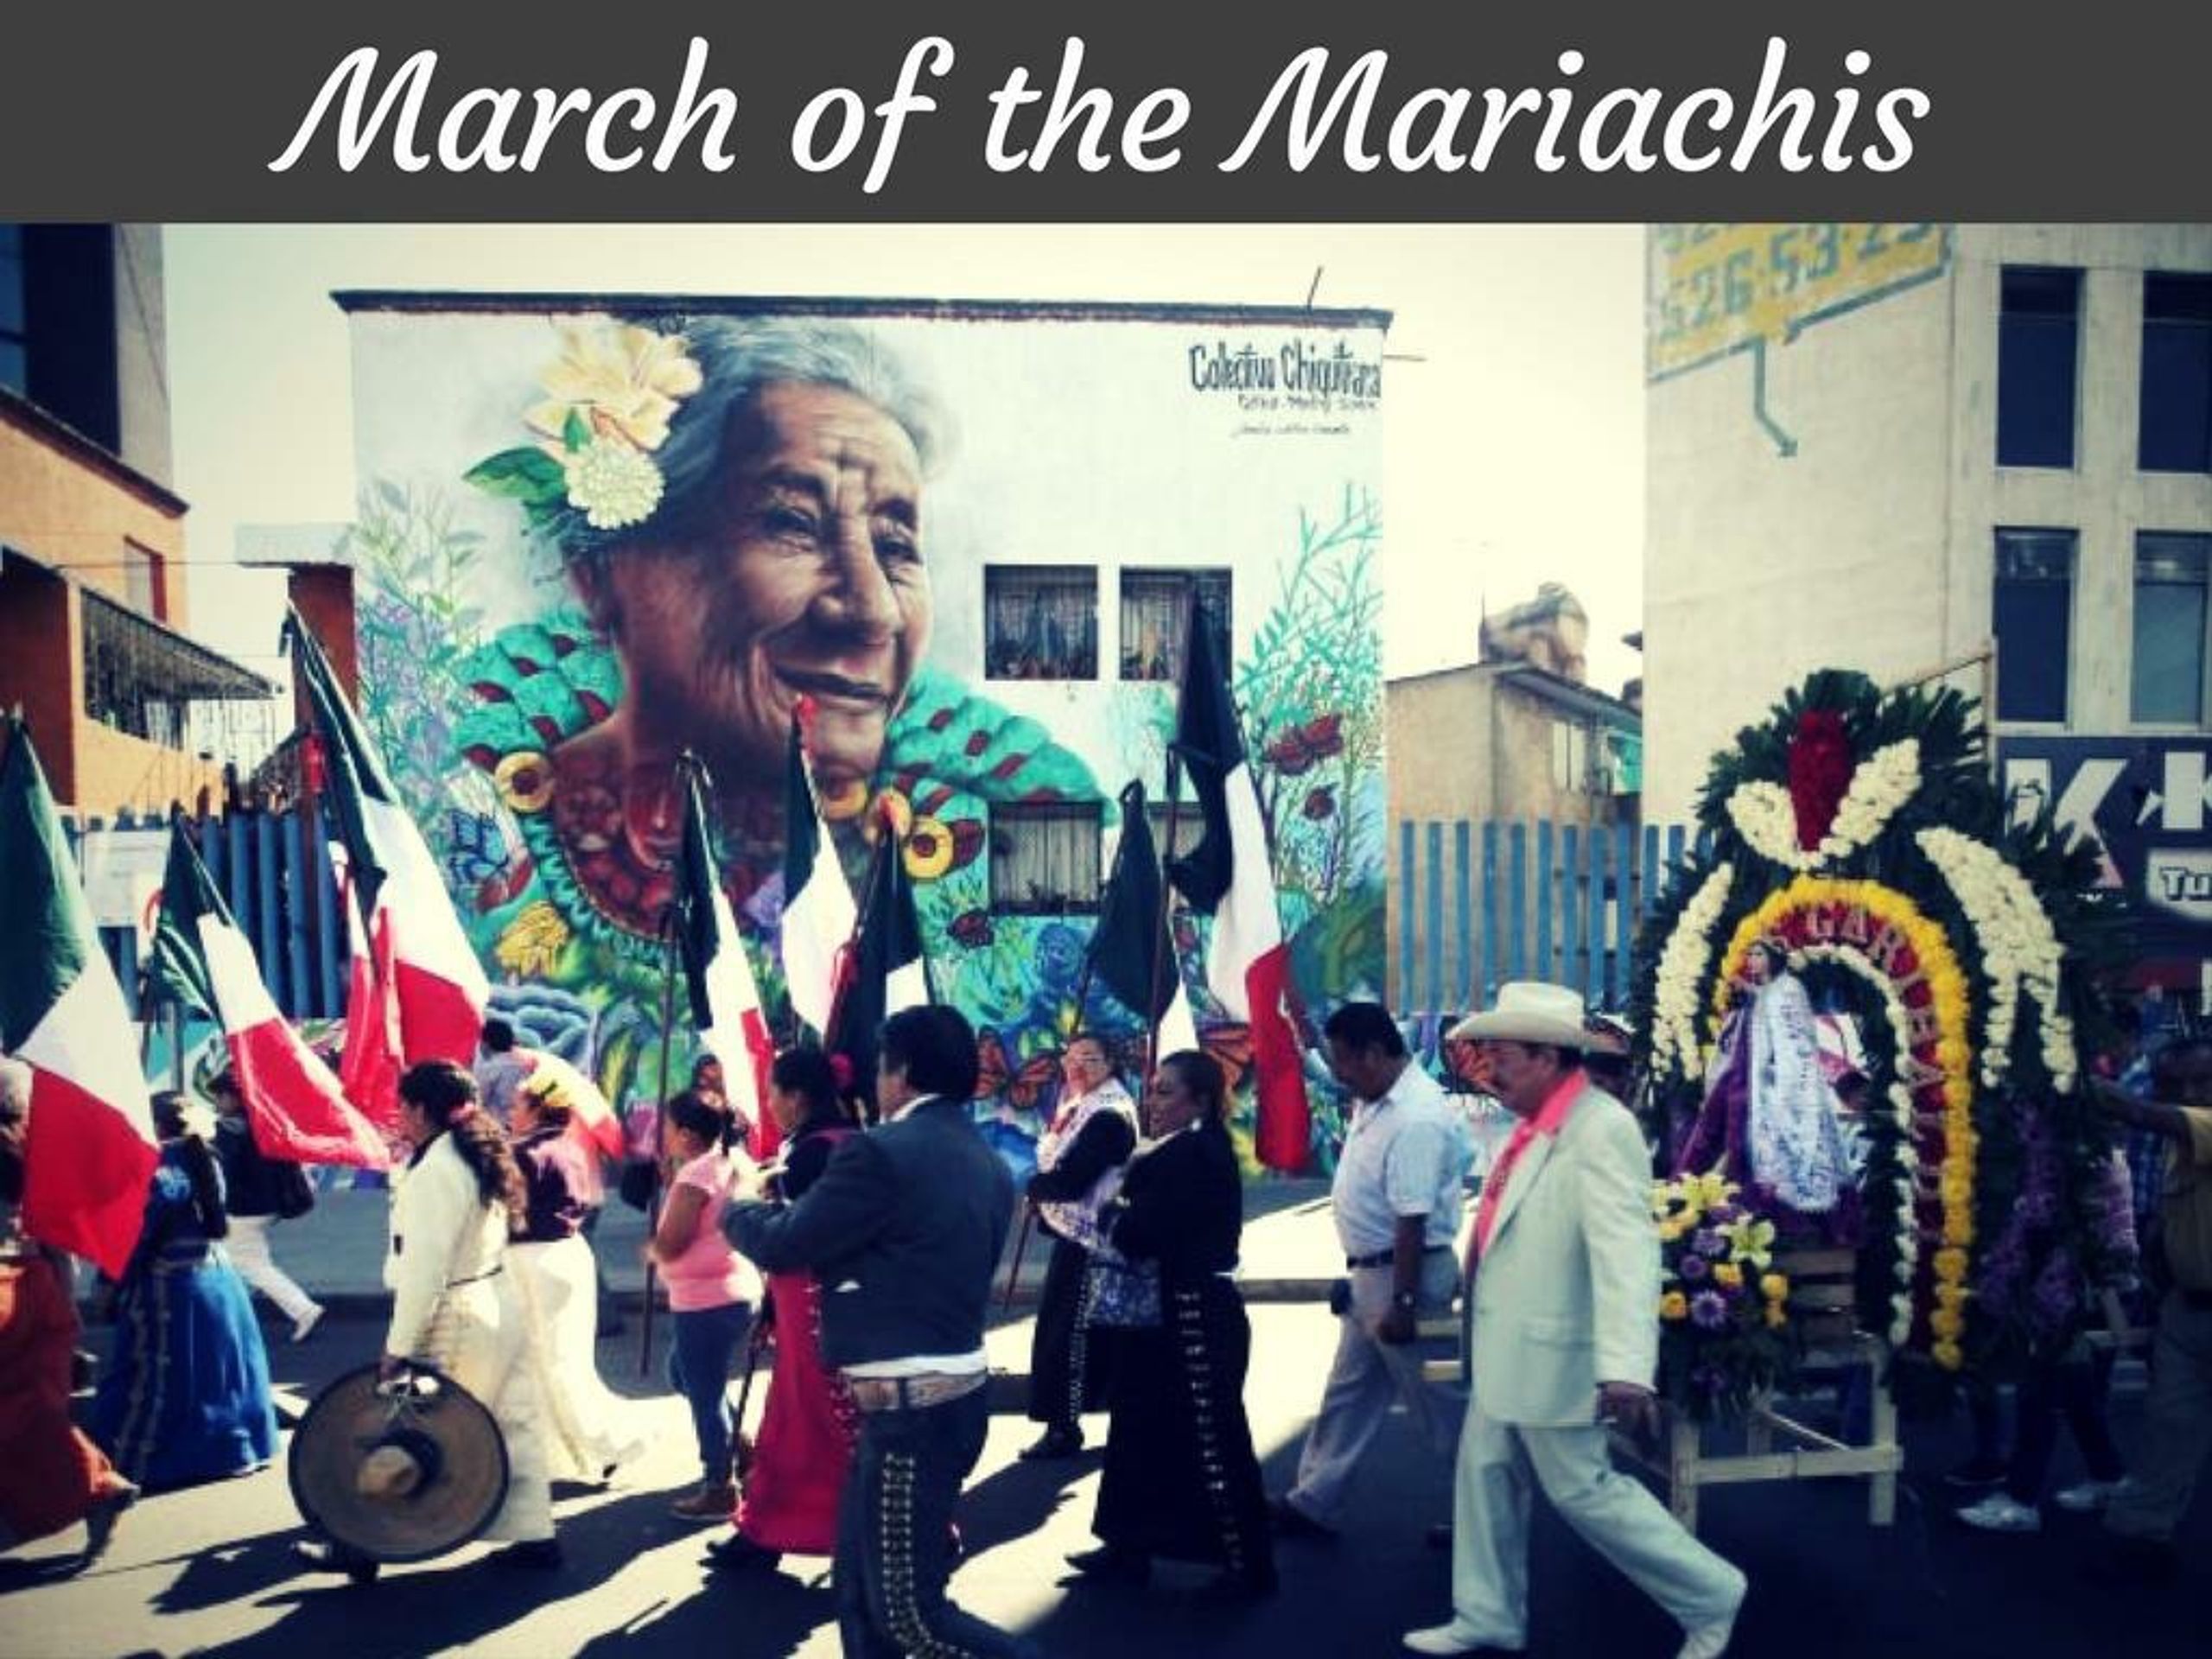 PPT - March of the mariachis PowerPoint Presentation, free download ...